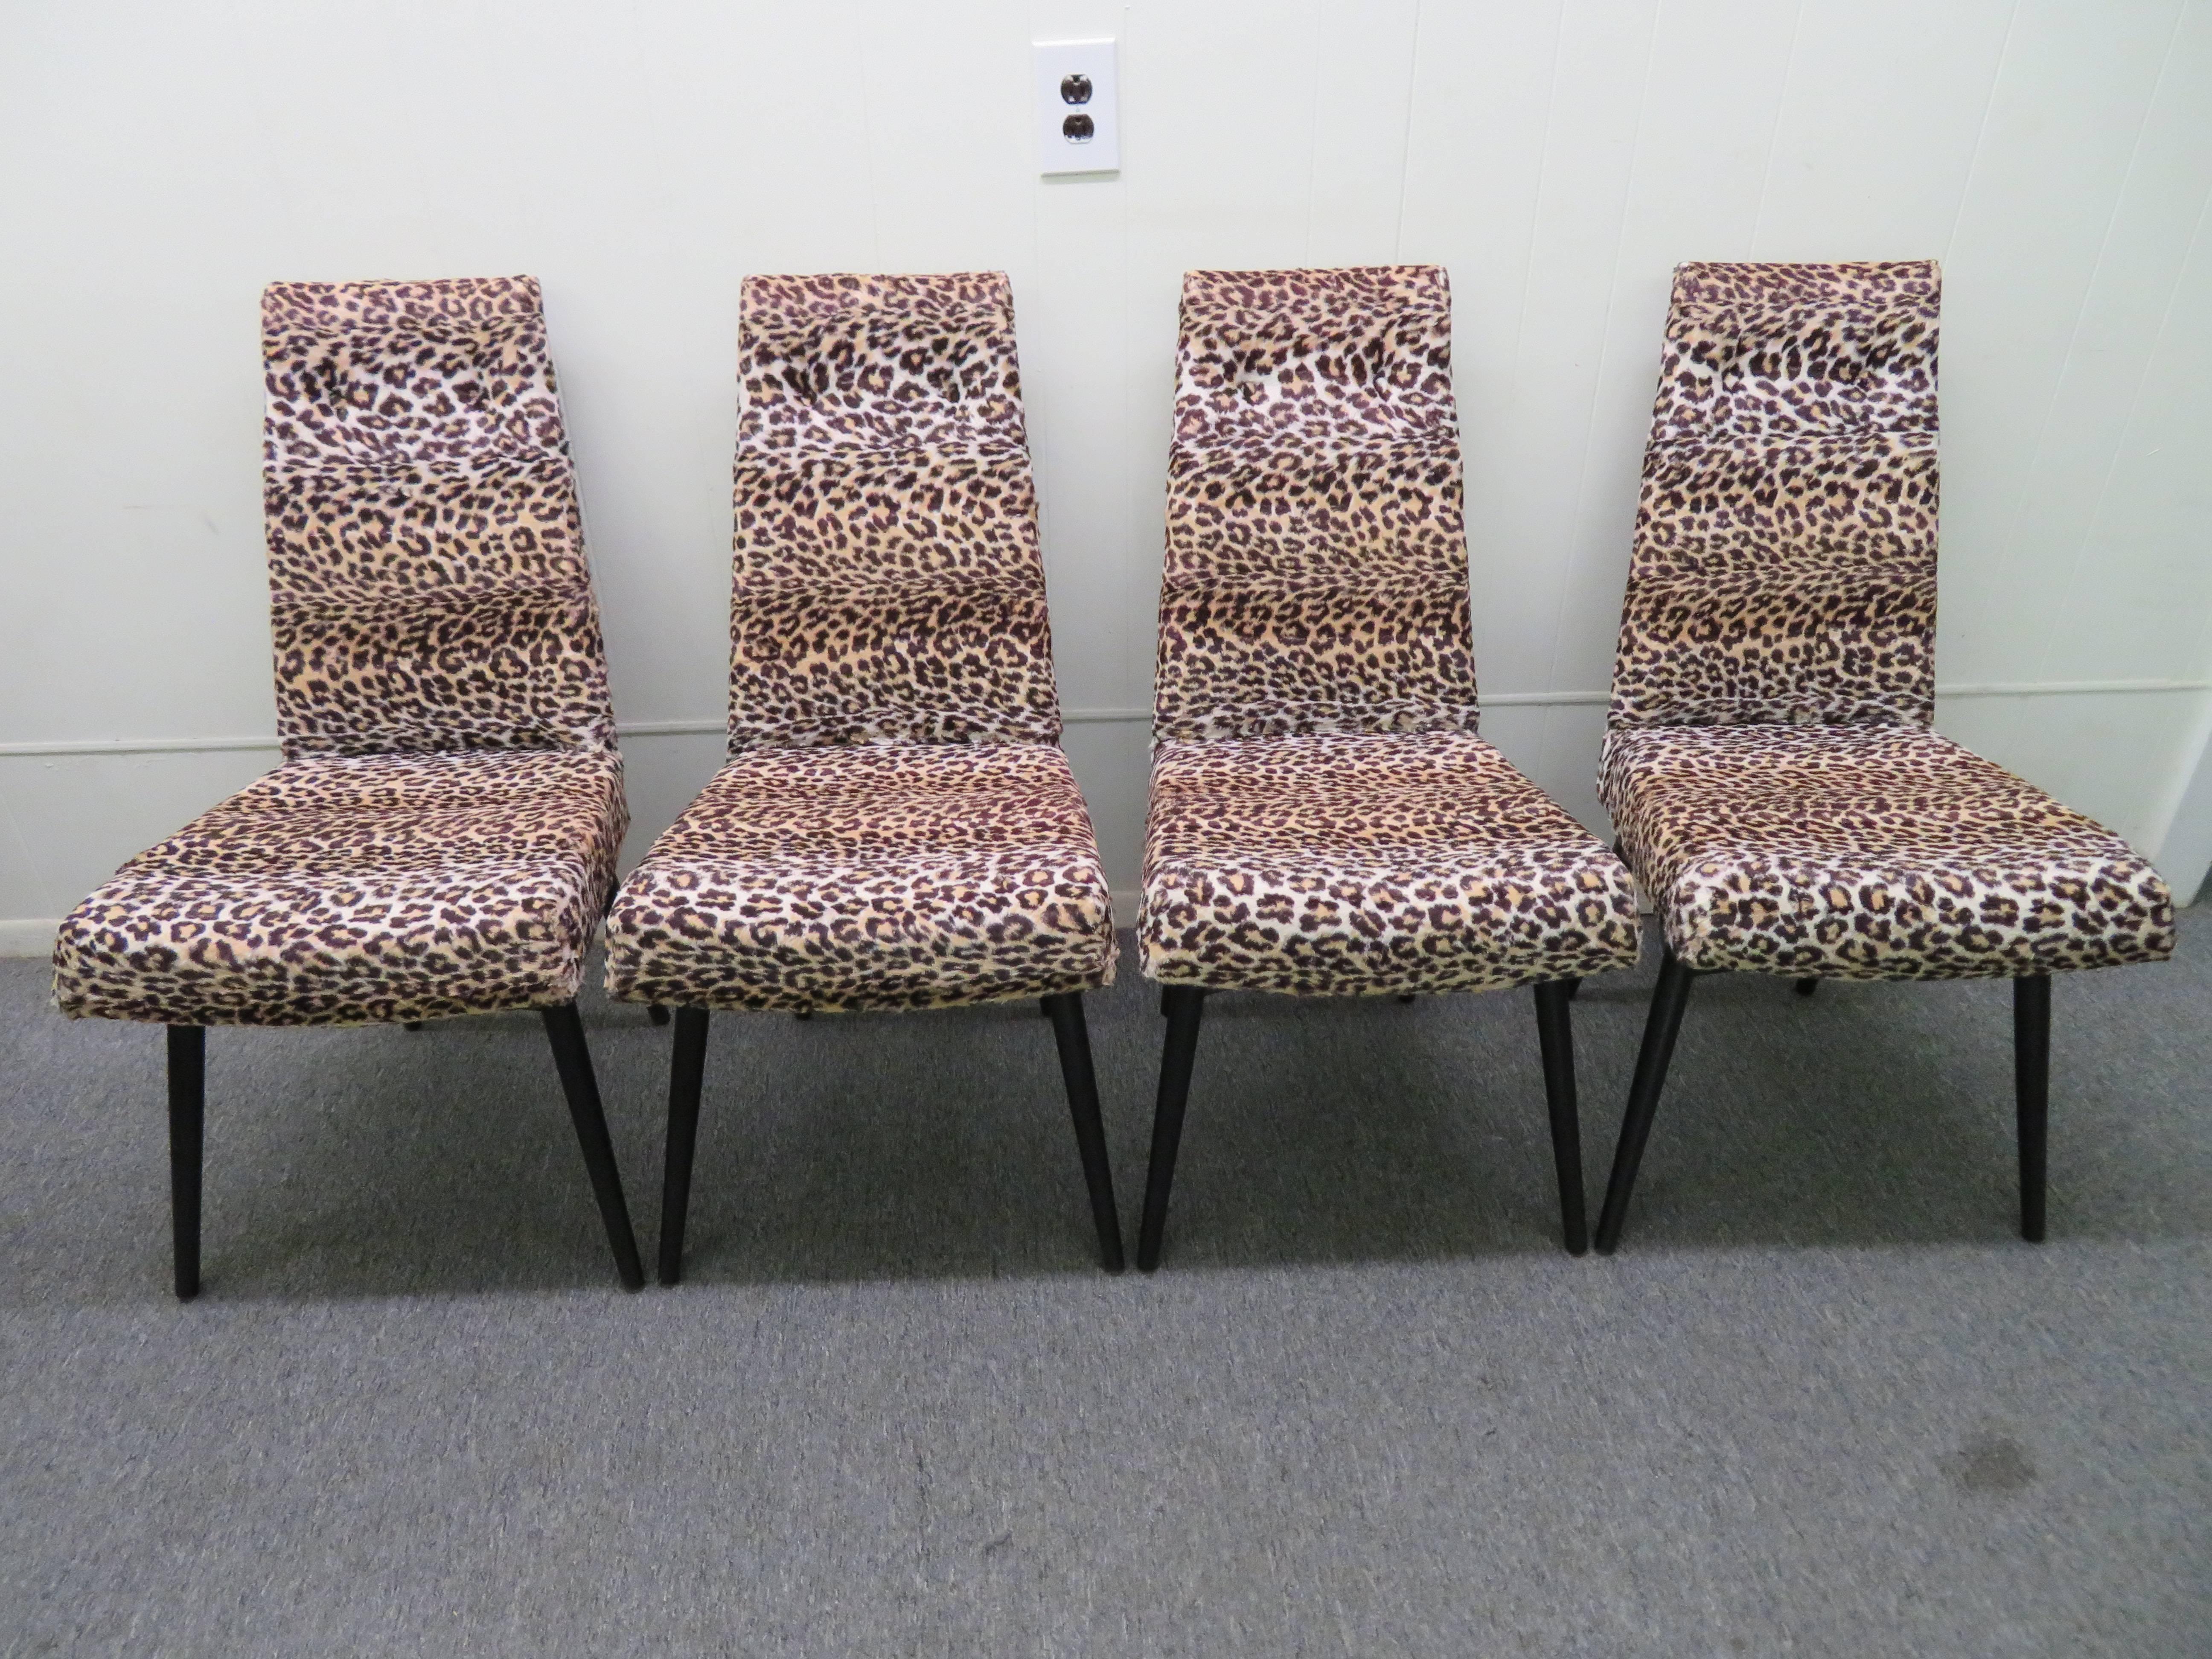 Stunning set of four Adrian Pearsall black lacquered dining chairs. These chairs retain their original black lacquered finish in very nice condition-very rare color. Also the white faux leopard is vintage and still looks great-very well cared for.